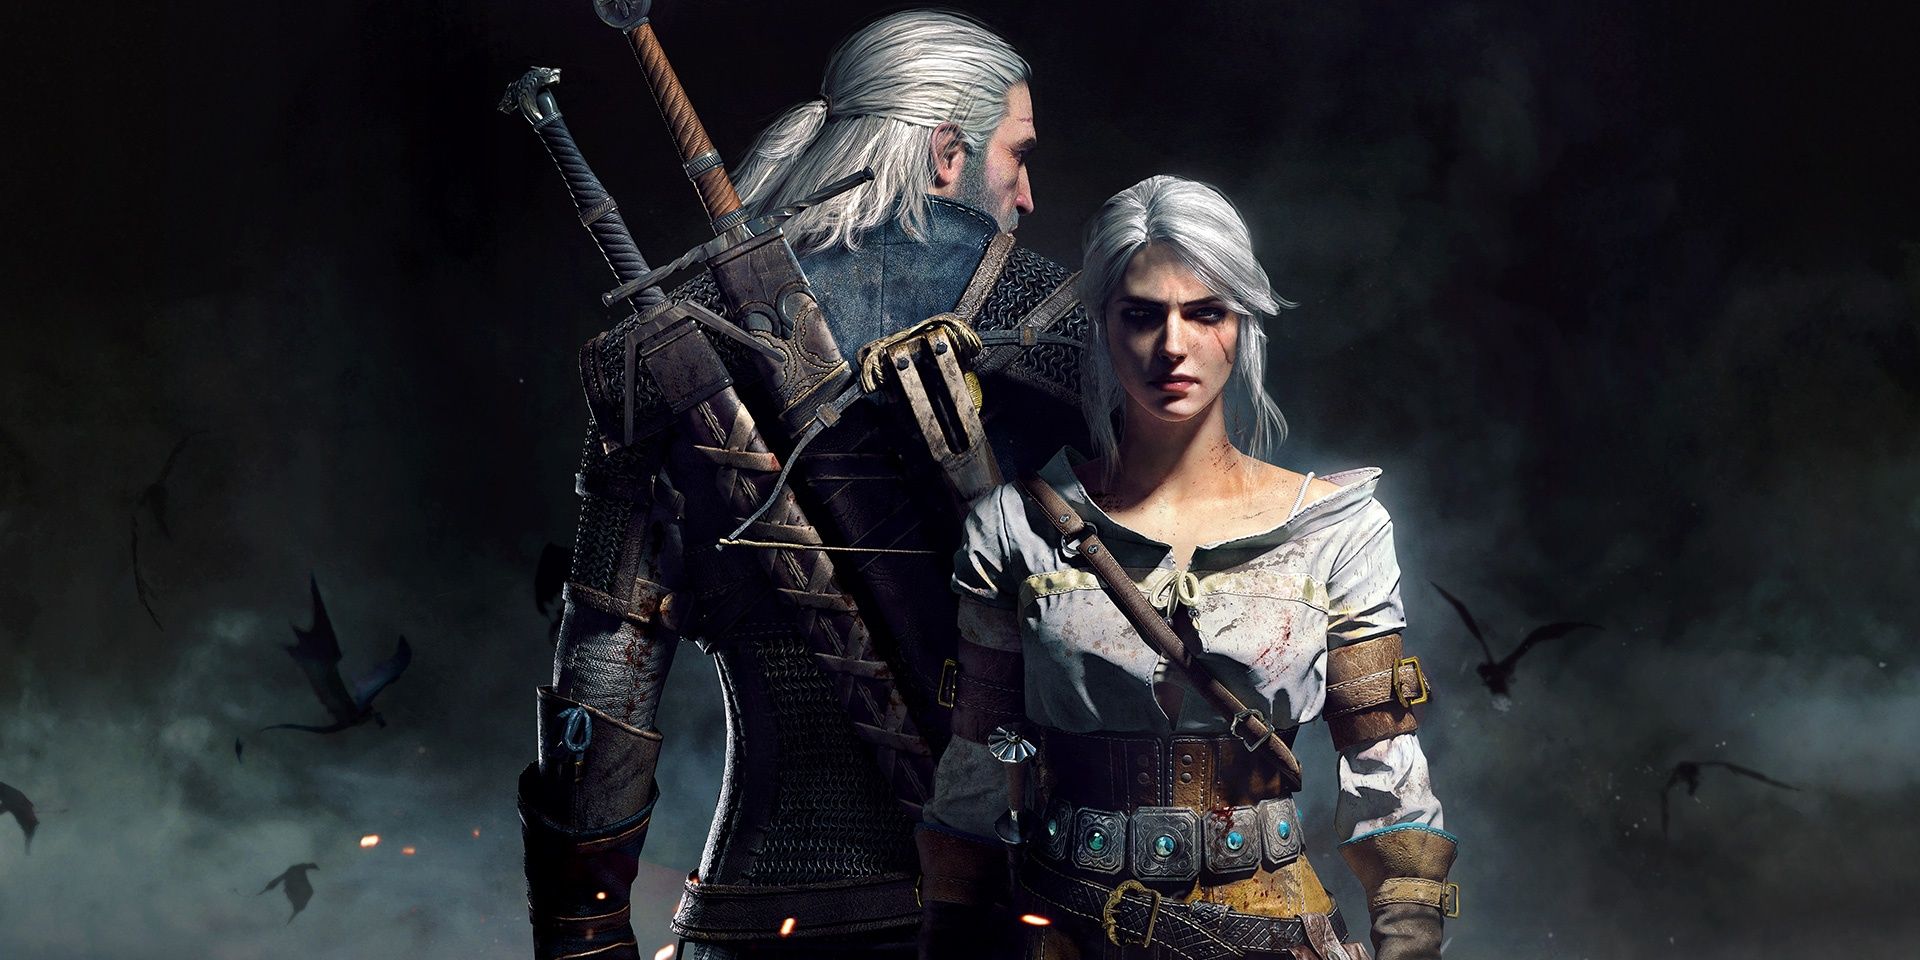 Geralt and Ciri in The Witcher 3: Wild Hunt